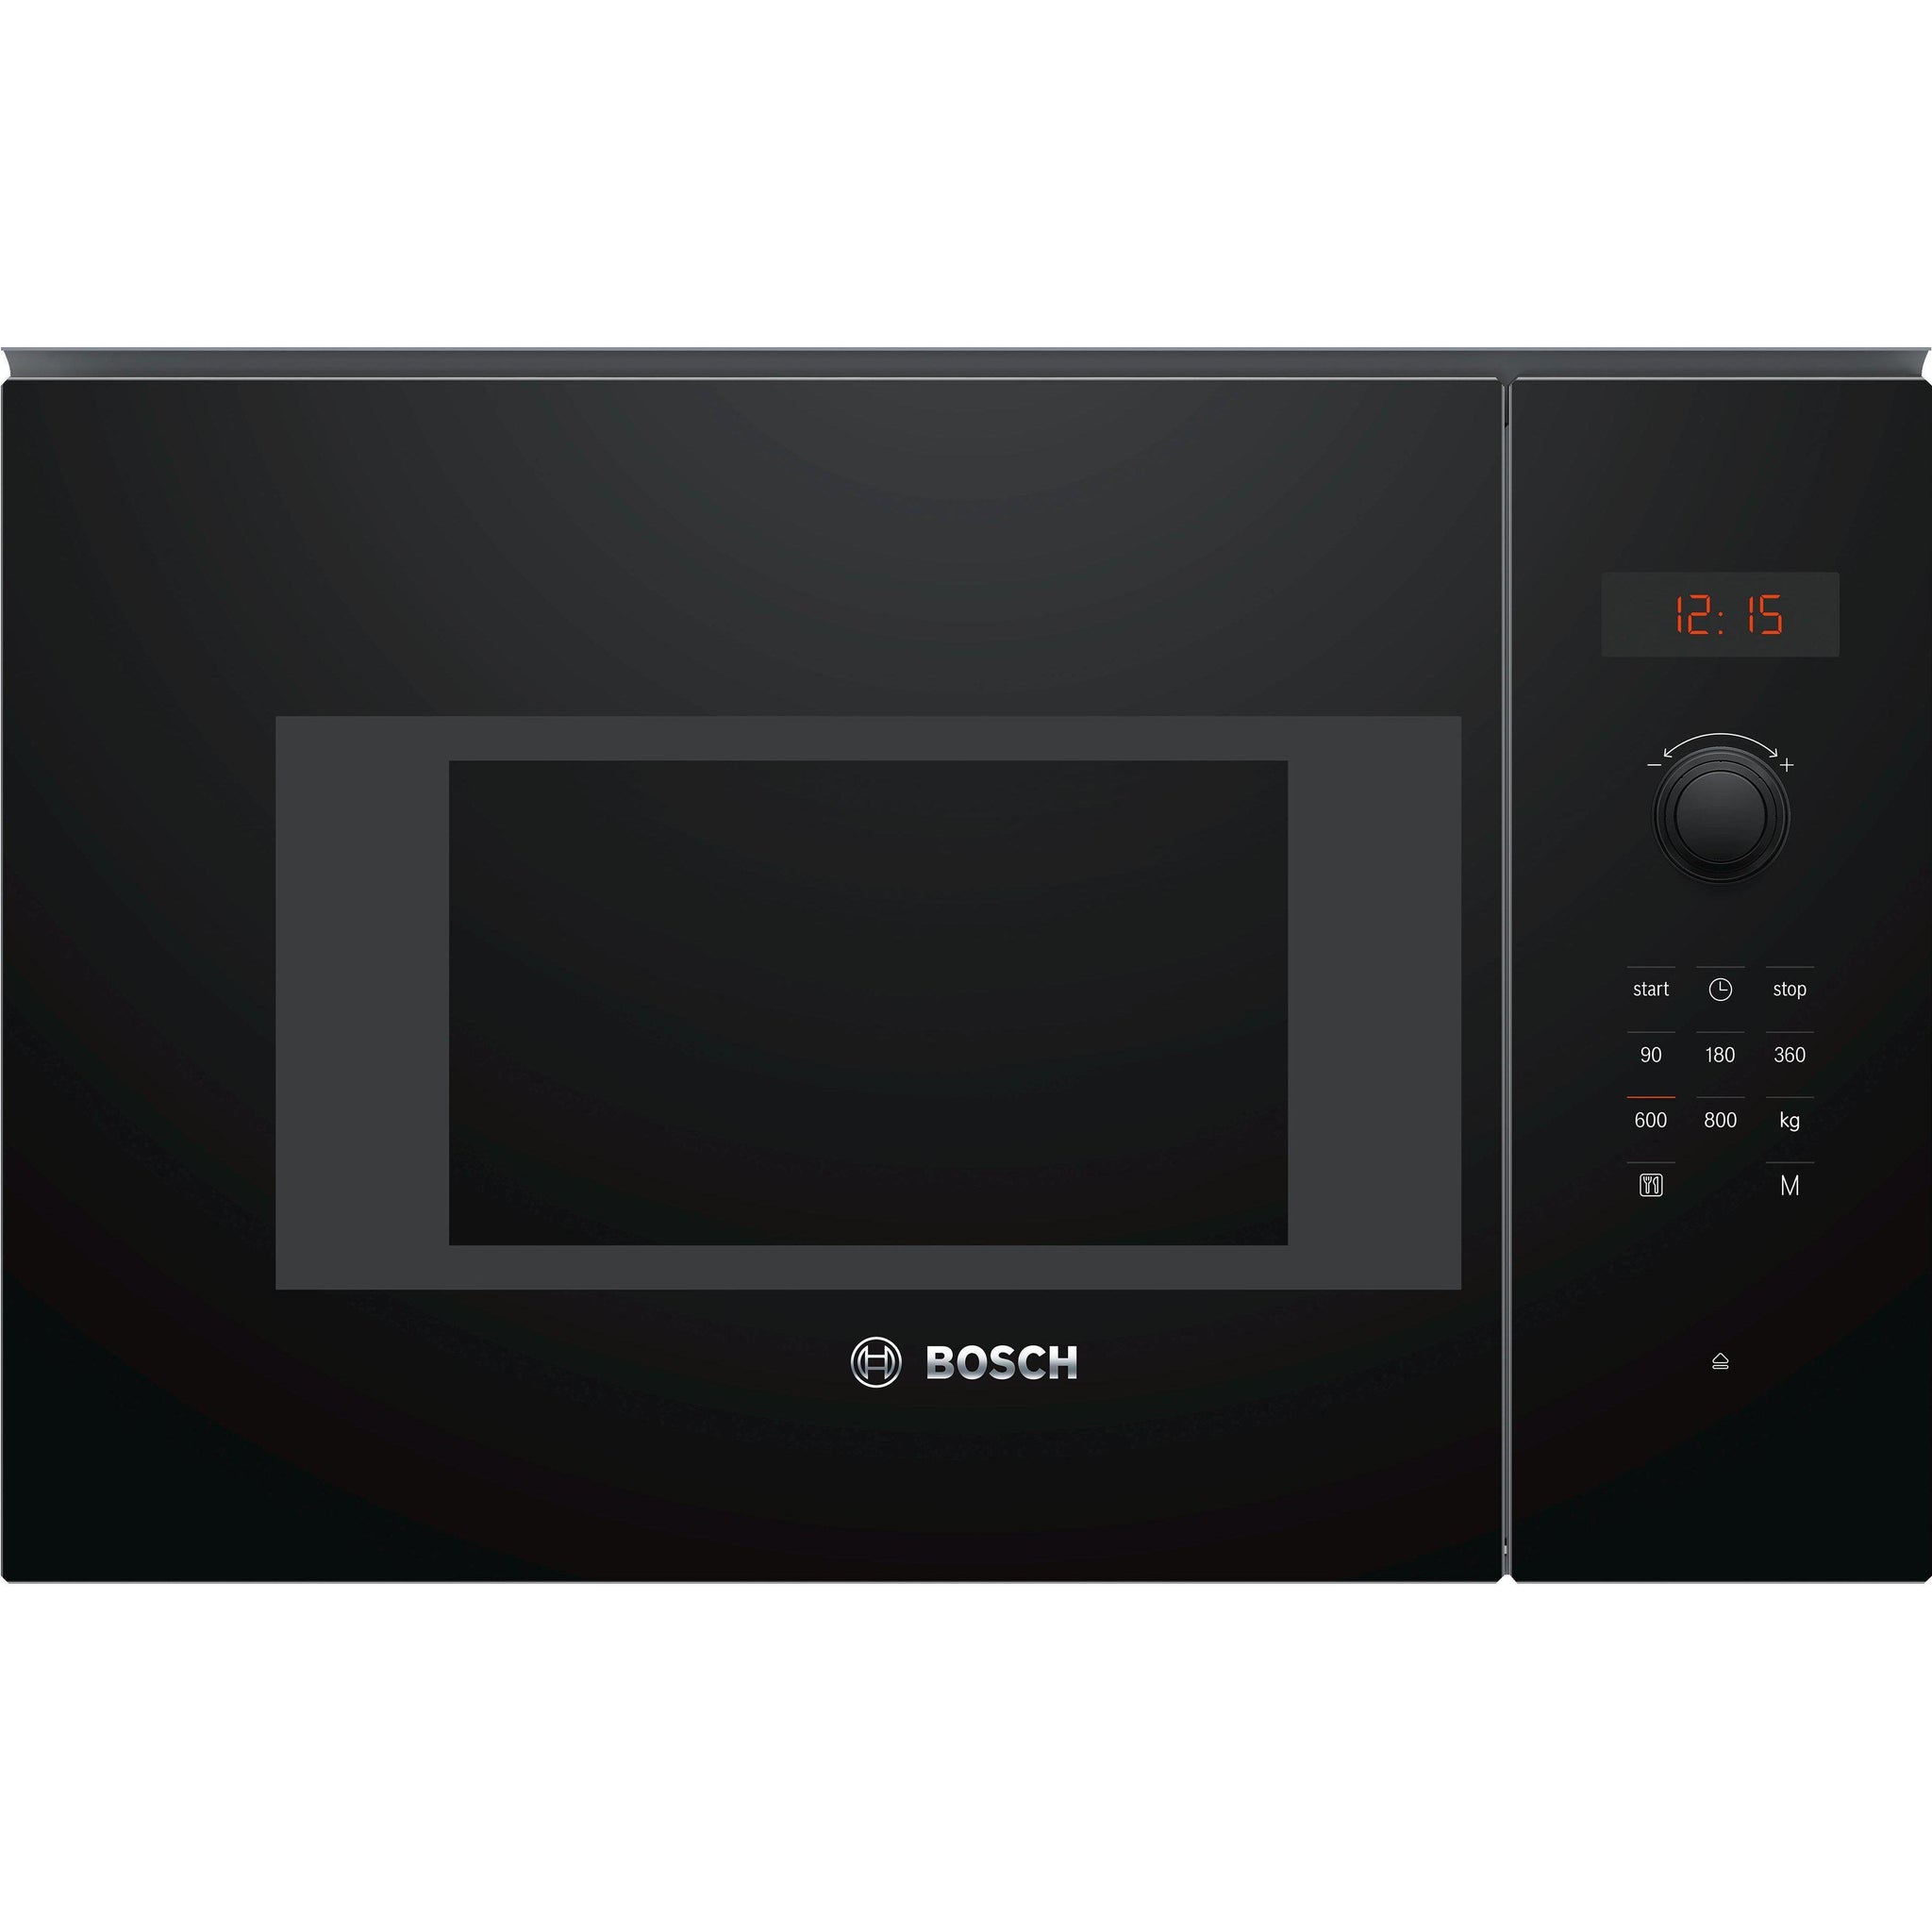 Bosch Serie 4 Bfl523mb0b Builtin Microwave Black Delivery Within 5 Working Days